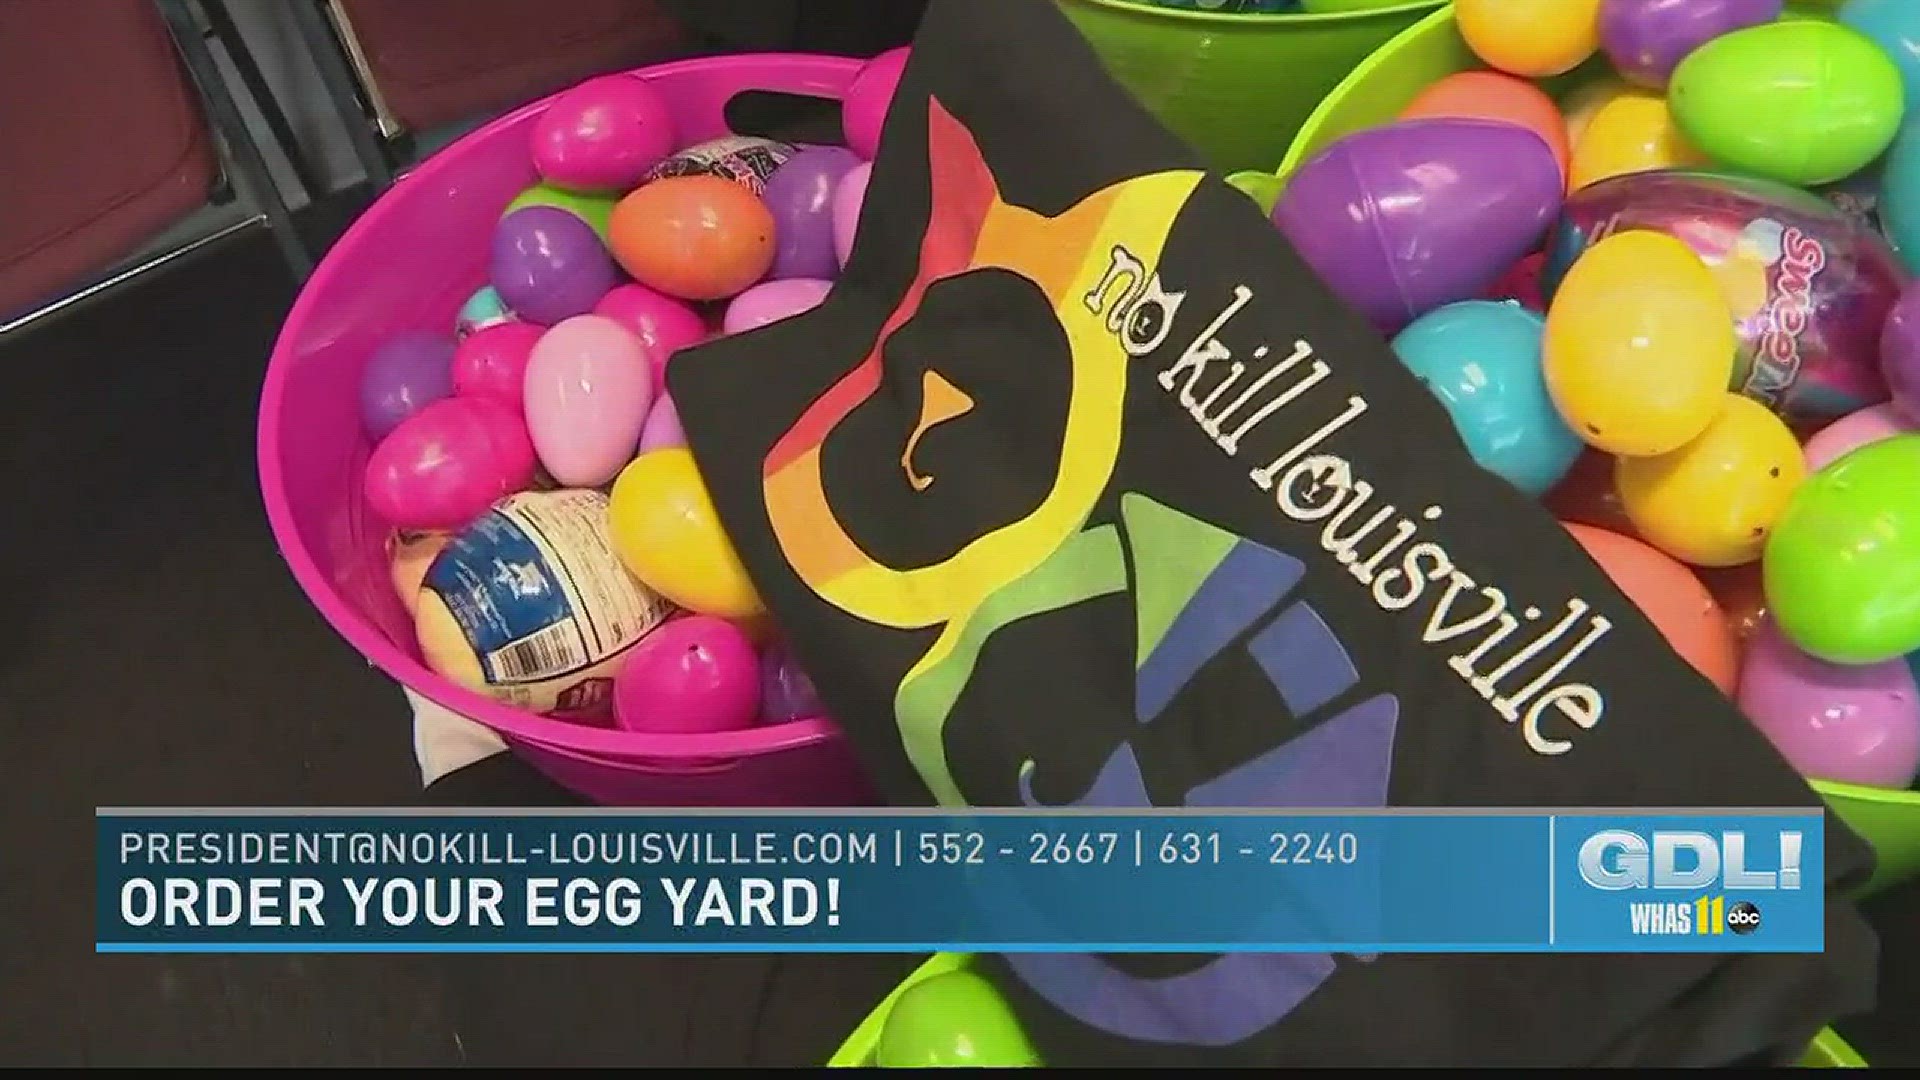 A local nonprofit will sprinkle local yards with colorful Easter eggs but they need your help to fill them.